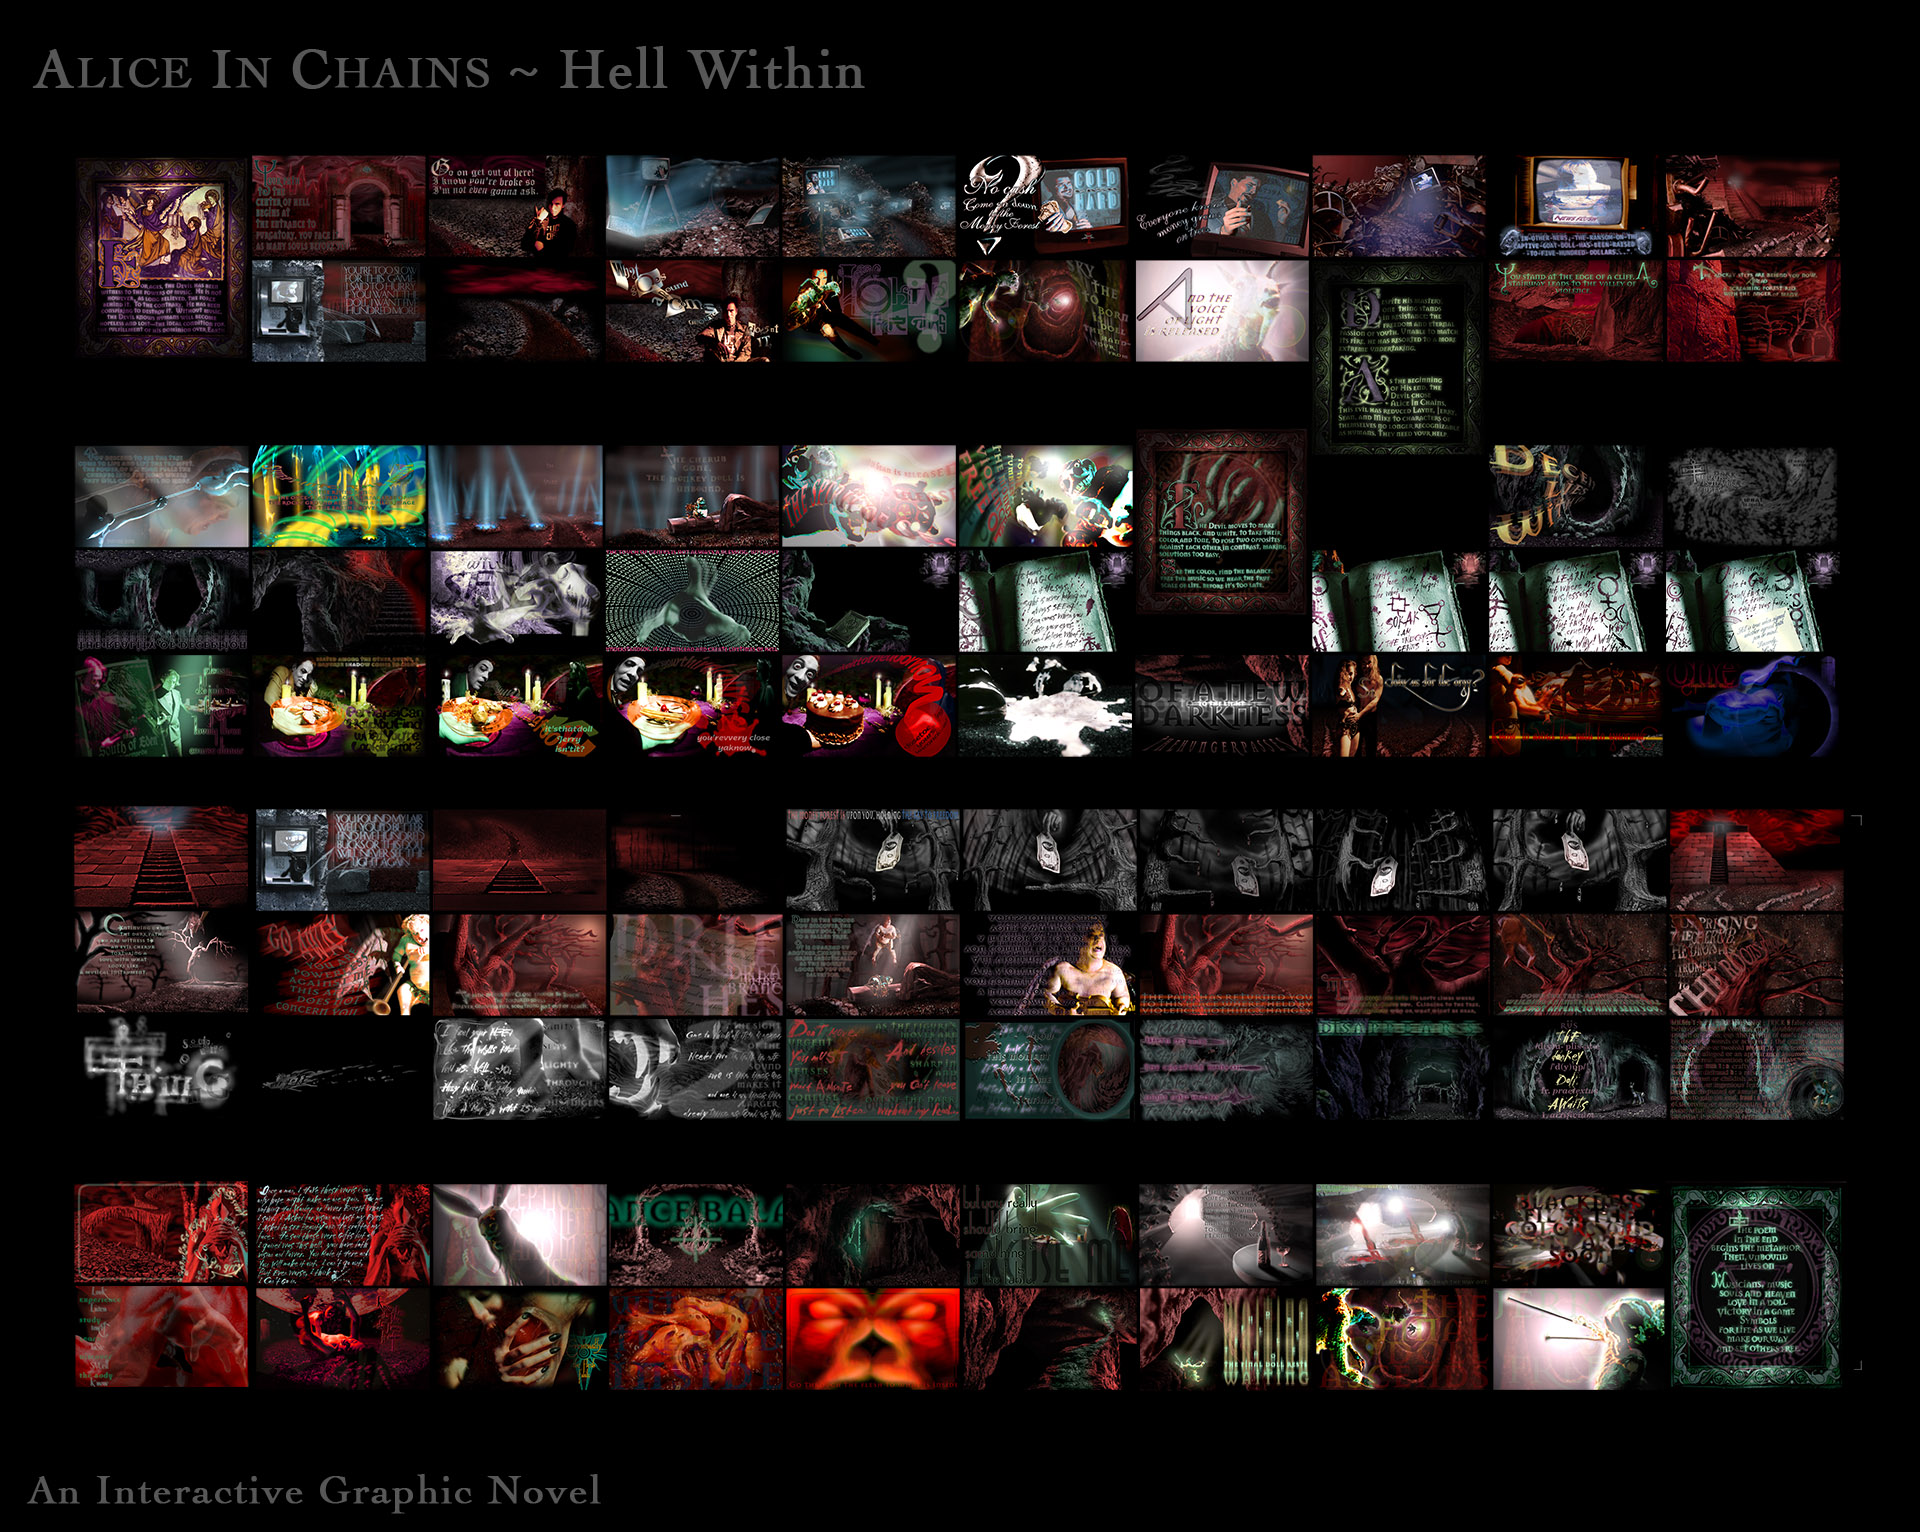 A colorful layout of scenes from the Alice In Chains graphic novel, Hell Within.